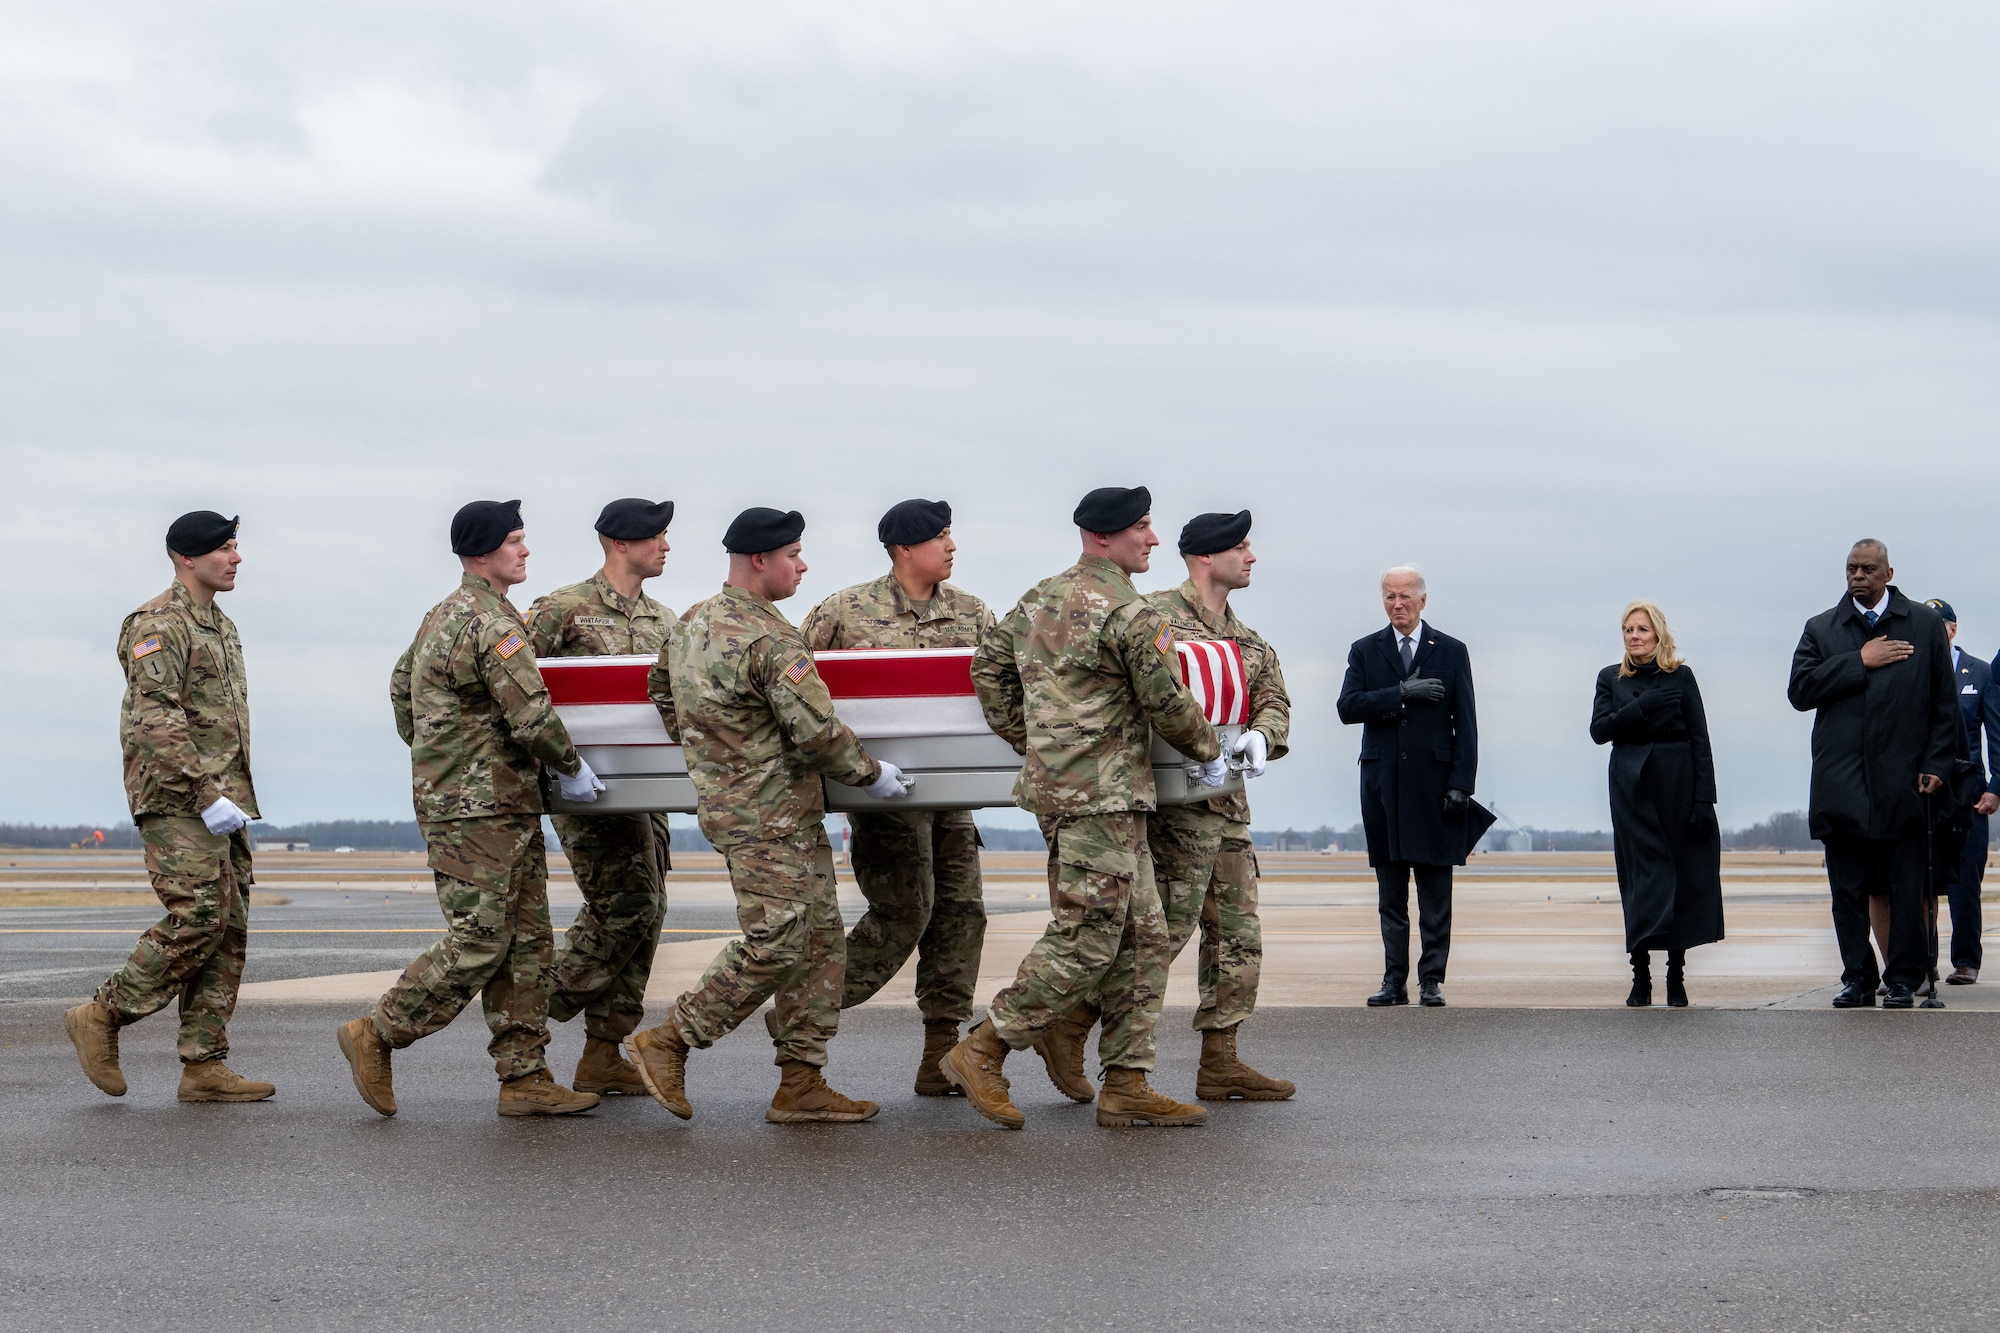 Army Staff Sgt. William J. Rivers honored in dignified transfer Feb. 2